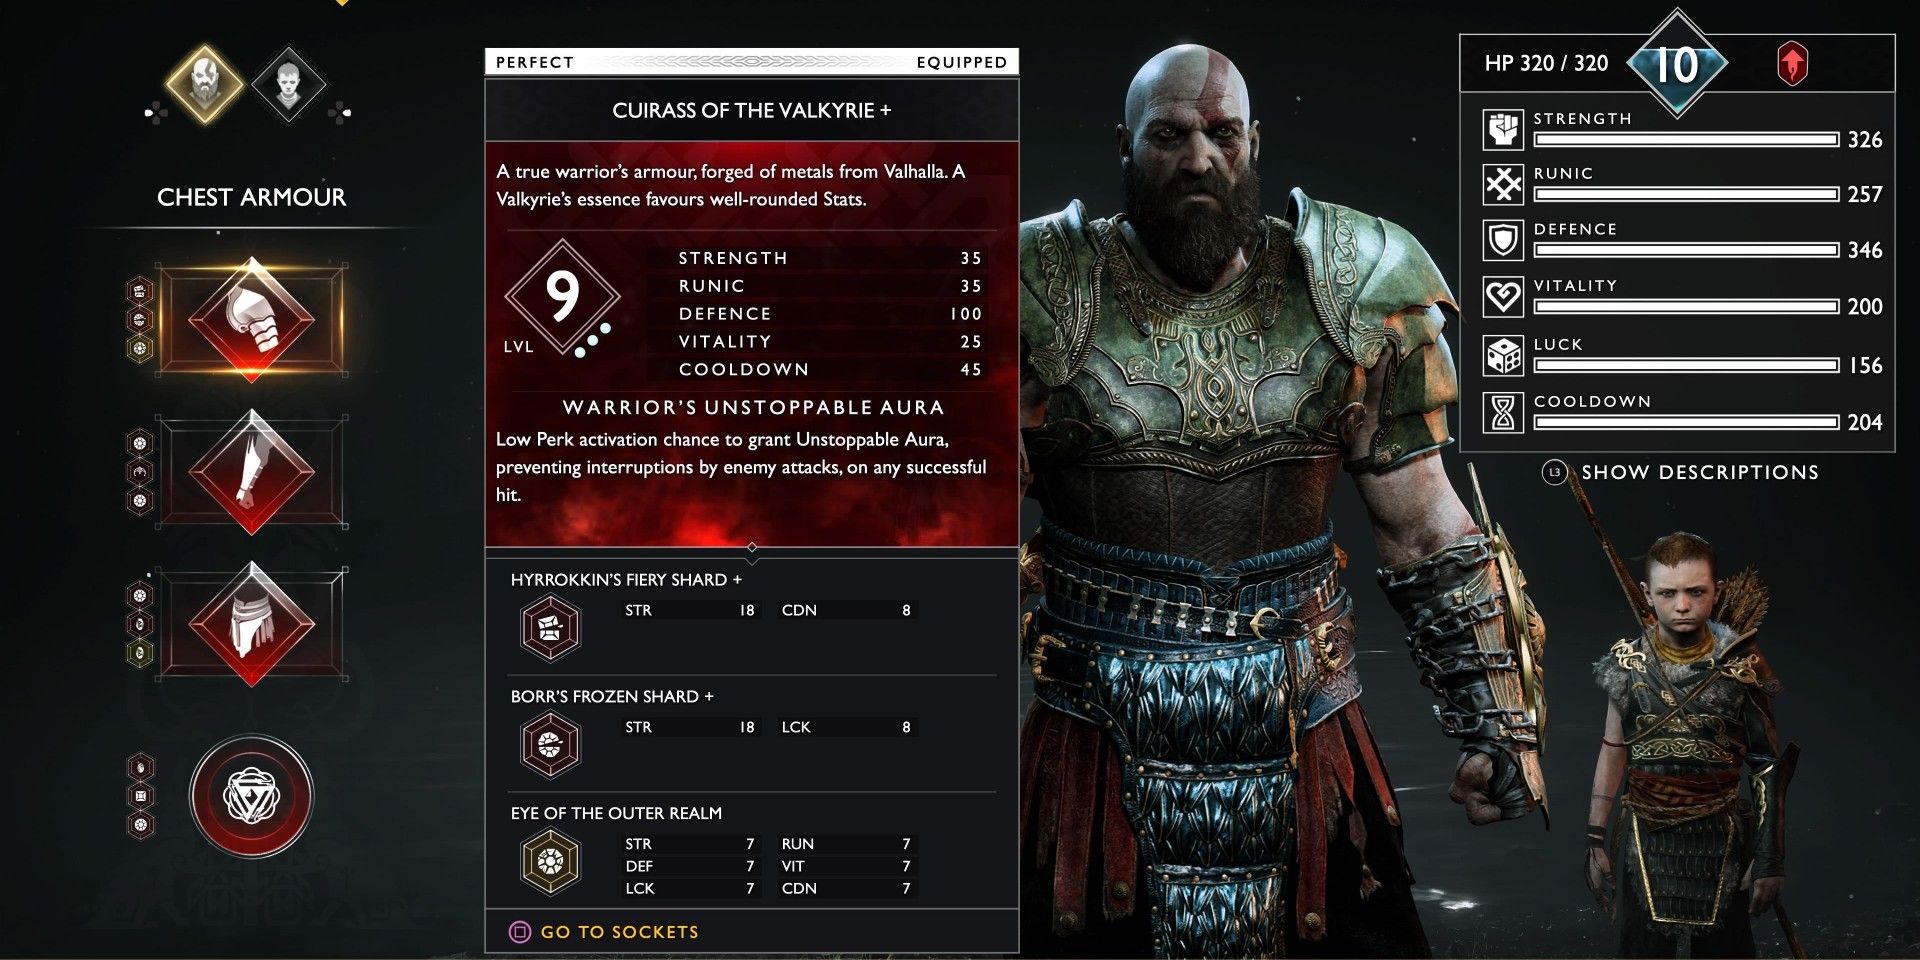 God of War 2018's Stat Menu, showing many different gradings and numbers for Kratos' current level and armor class